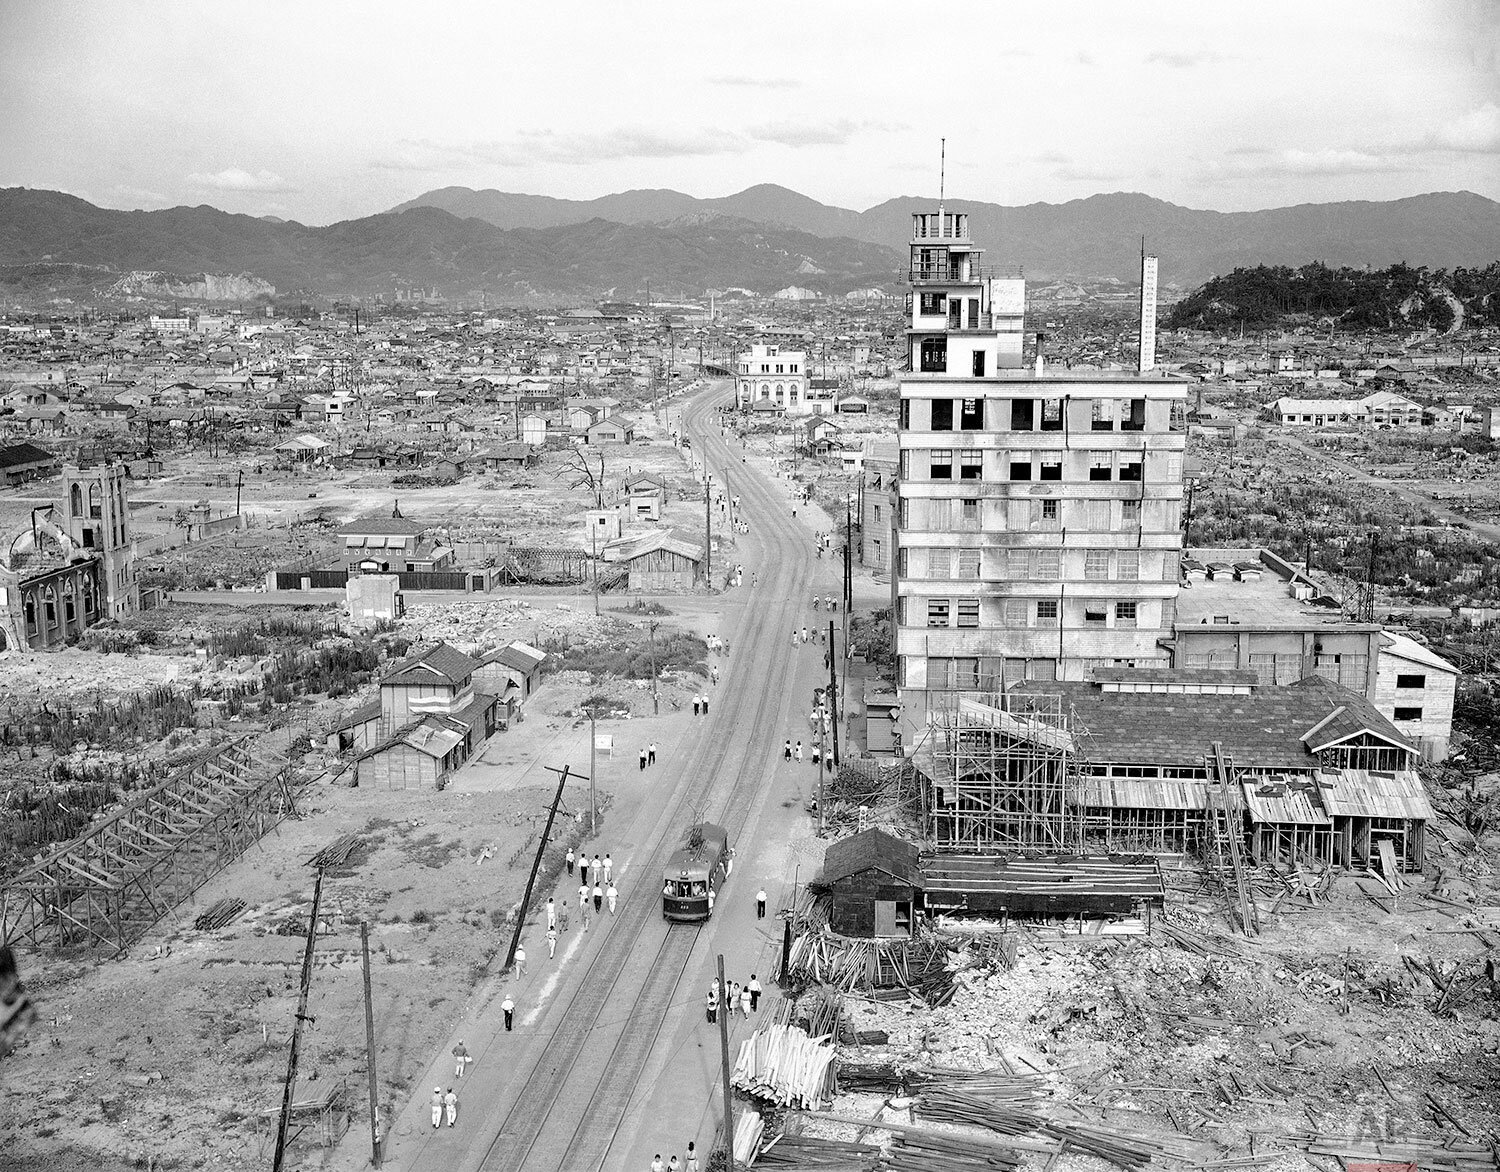  Hiroshima, Japan, still is a city of ruined buildings and vacant patches amid simple new structures, as seen in this air view made on July 20, 1946, almost one year after the atomic bomb burst there on August 6.  (AP Photo/Charles Gorry) 